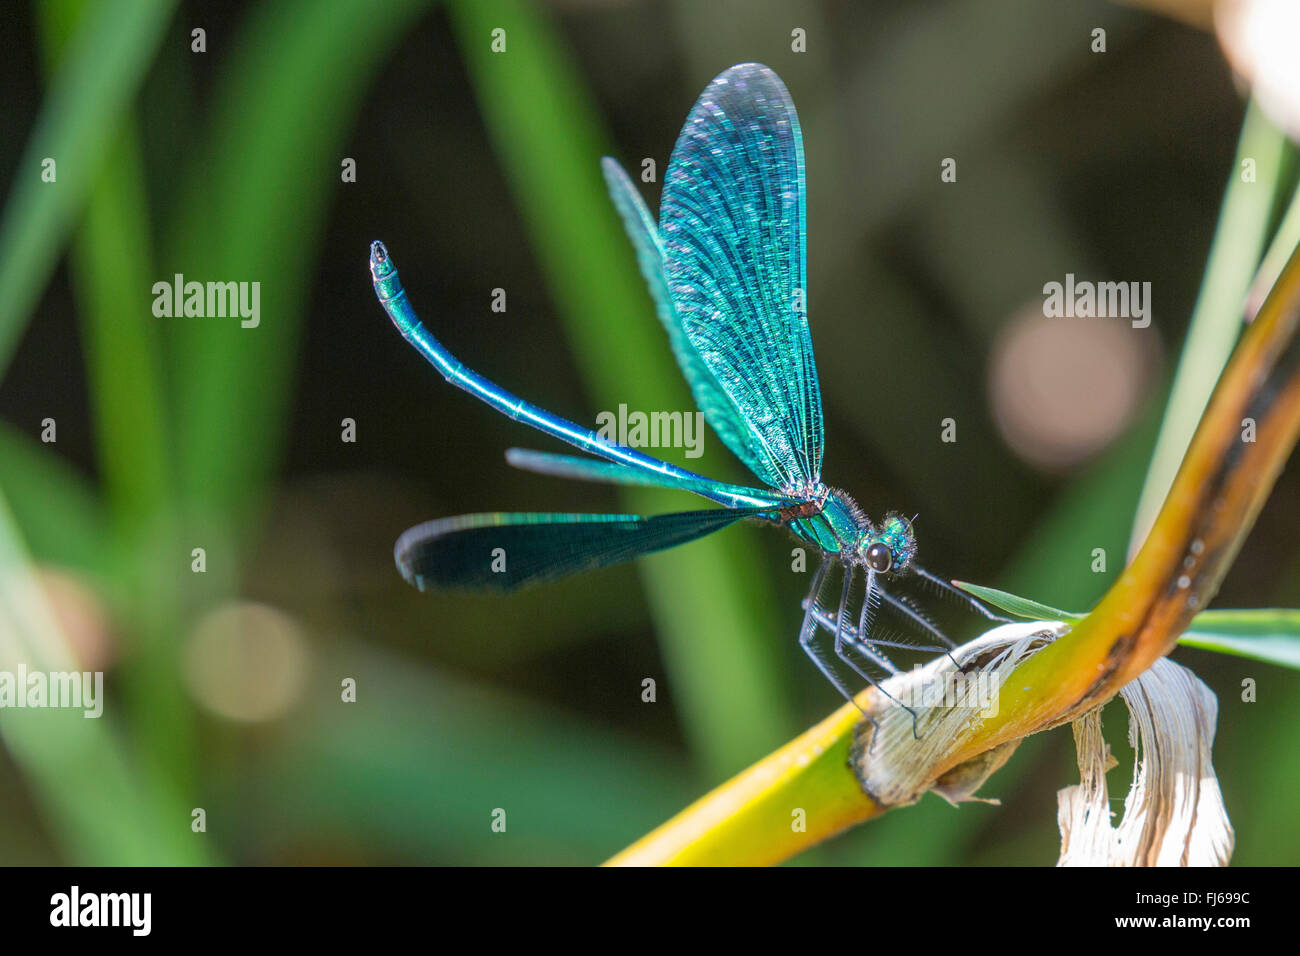 banded blackwings, banded agrion, banded demoiselle (Calopteryx splendens, Agrion splendens), male carving out its territory, Germany, Bavaria Stock Photo